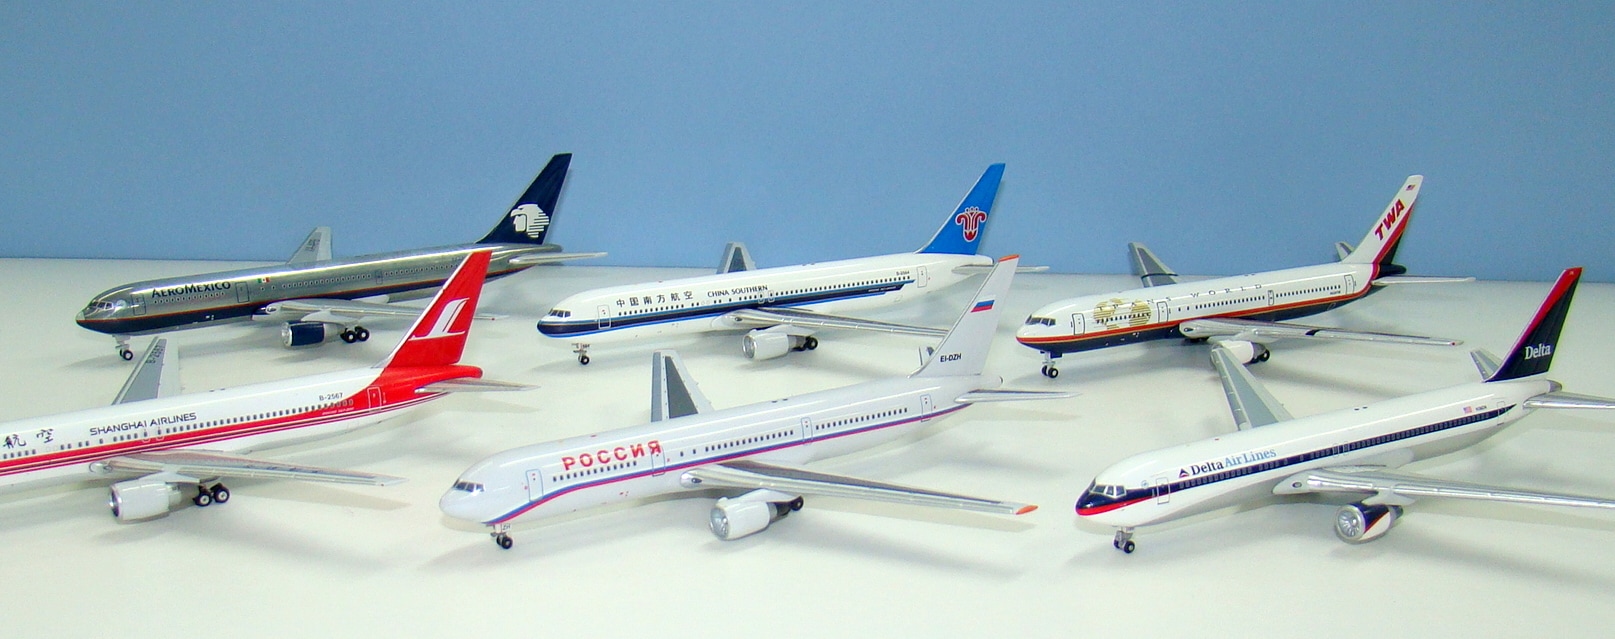 Flight Miniatures Boeing 767-300 House Colors 1981 Demo Livery 1:200 Scale Display Model